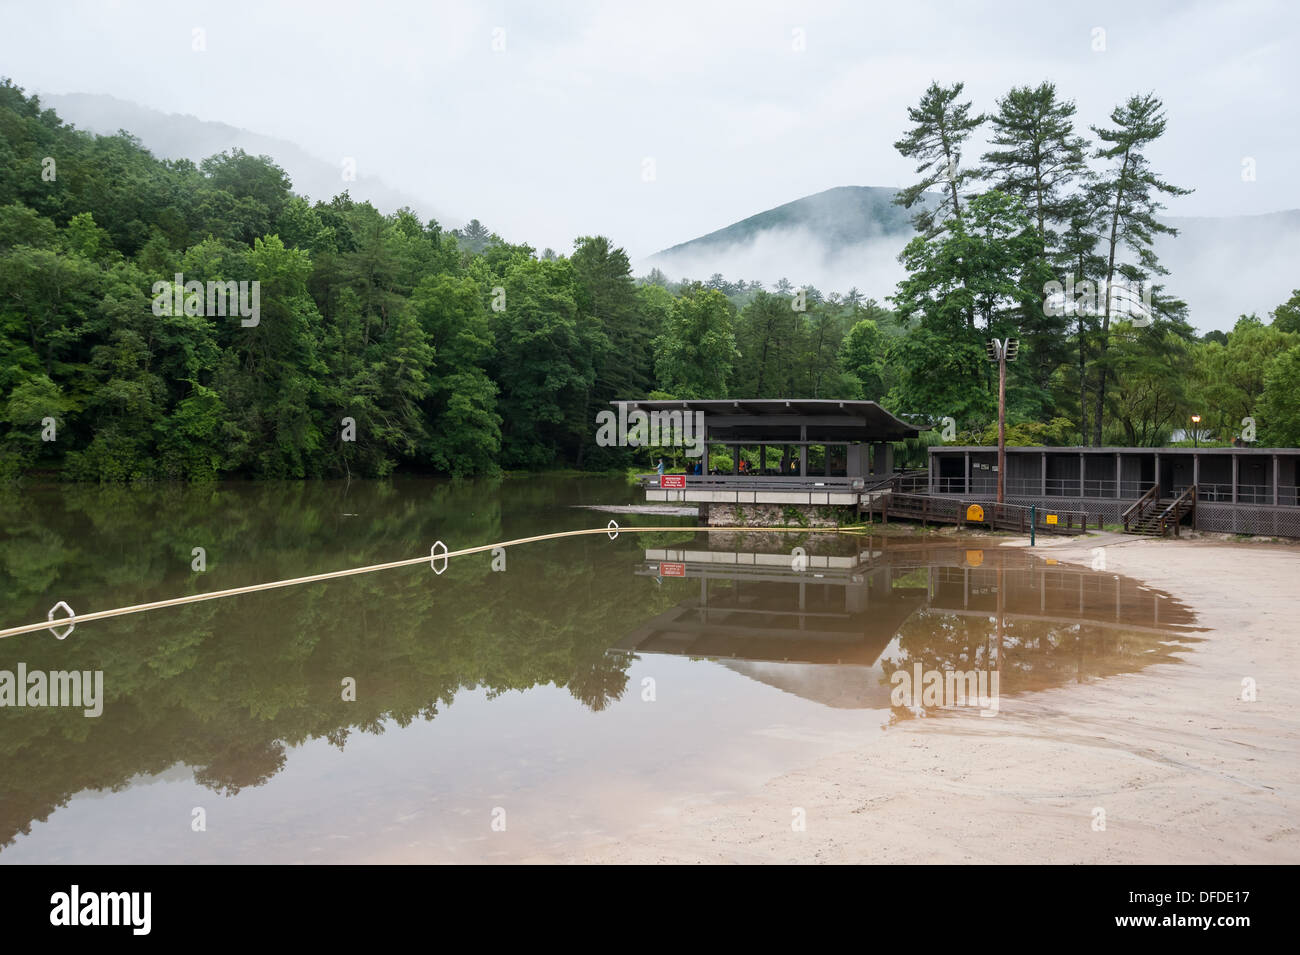 People relaxing and fishing from the pavillion as clouds hang low in the mountains surrounding beautiful Vogel State Park. Stock Photo